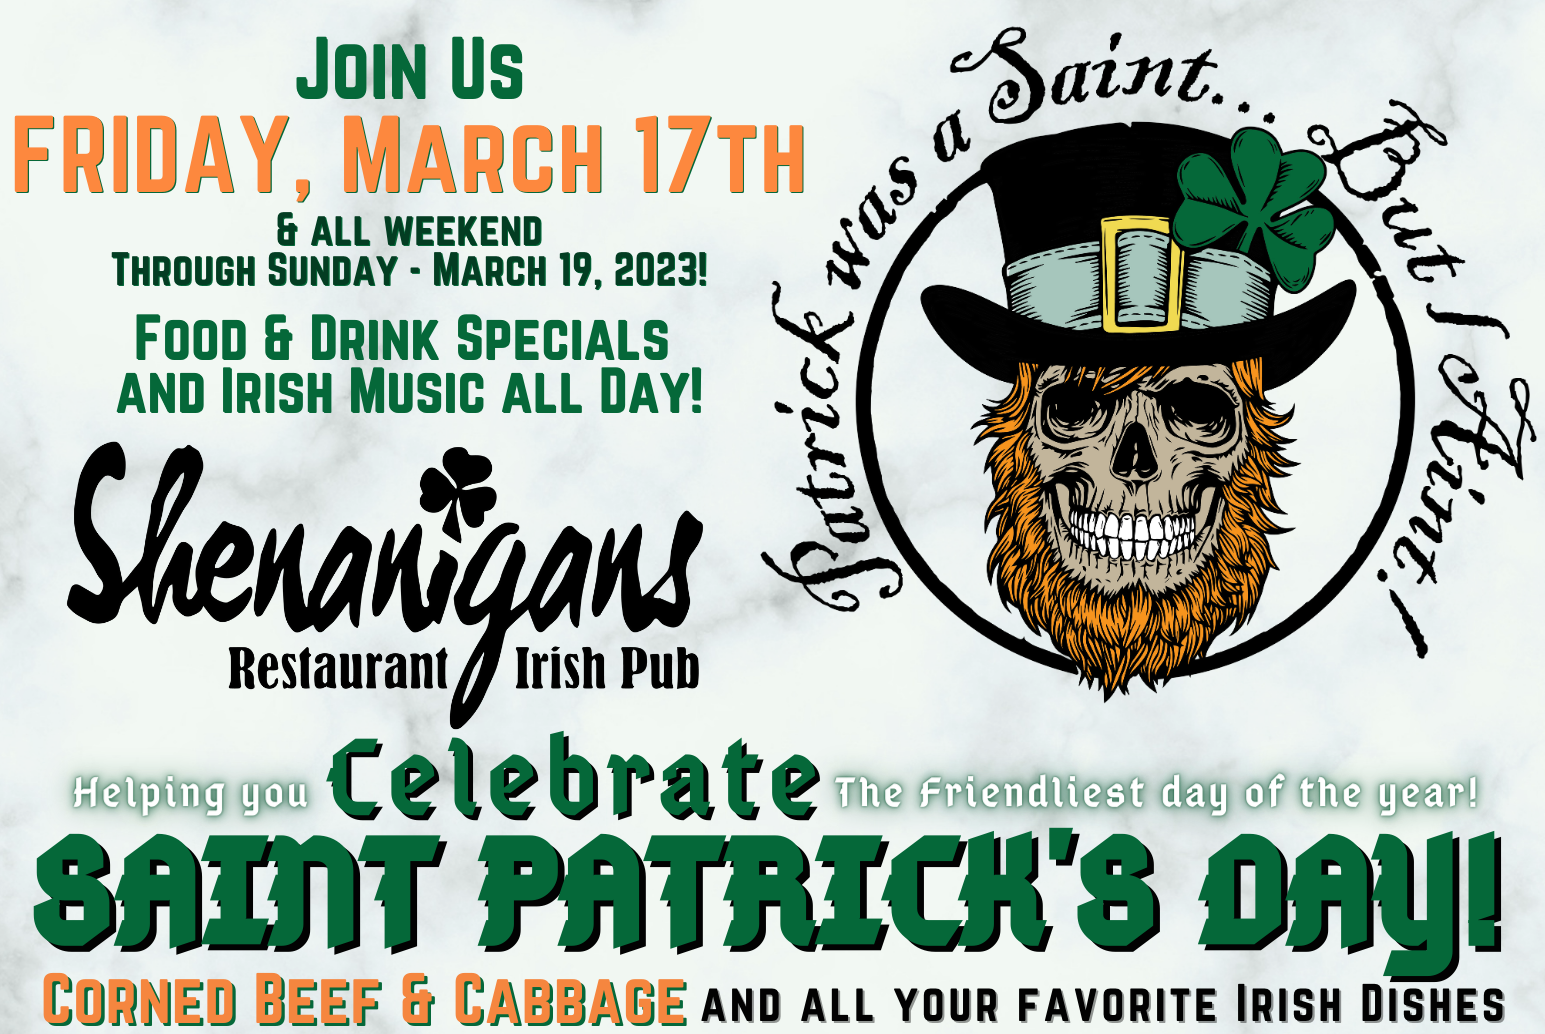 St. Patrick's Day Weekend!